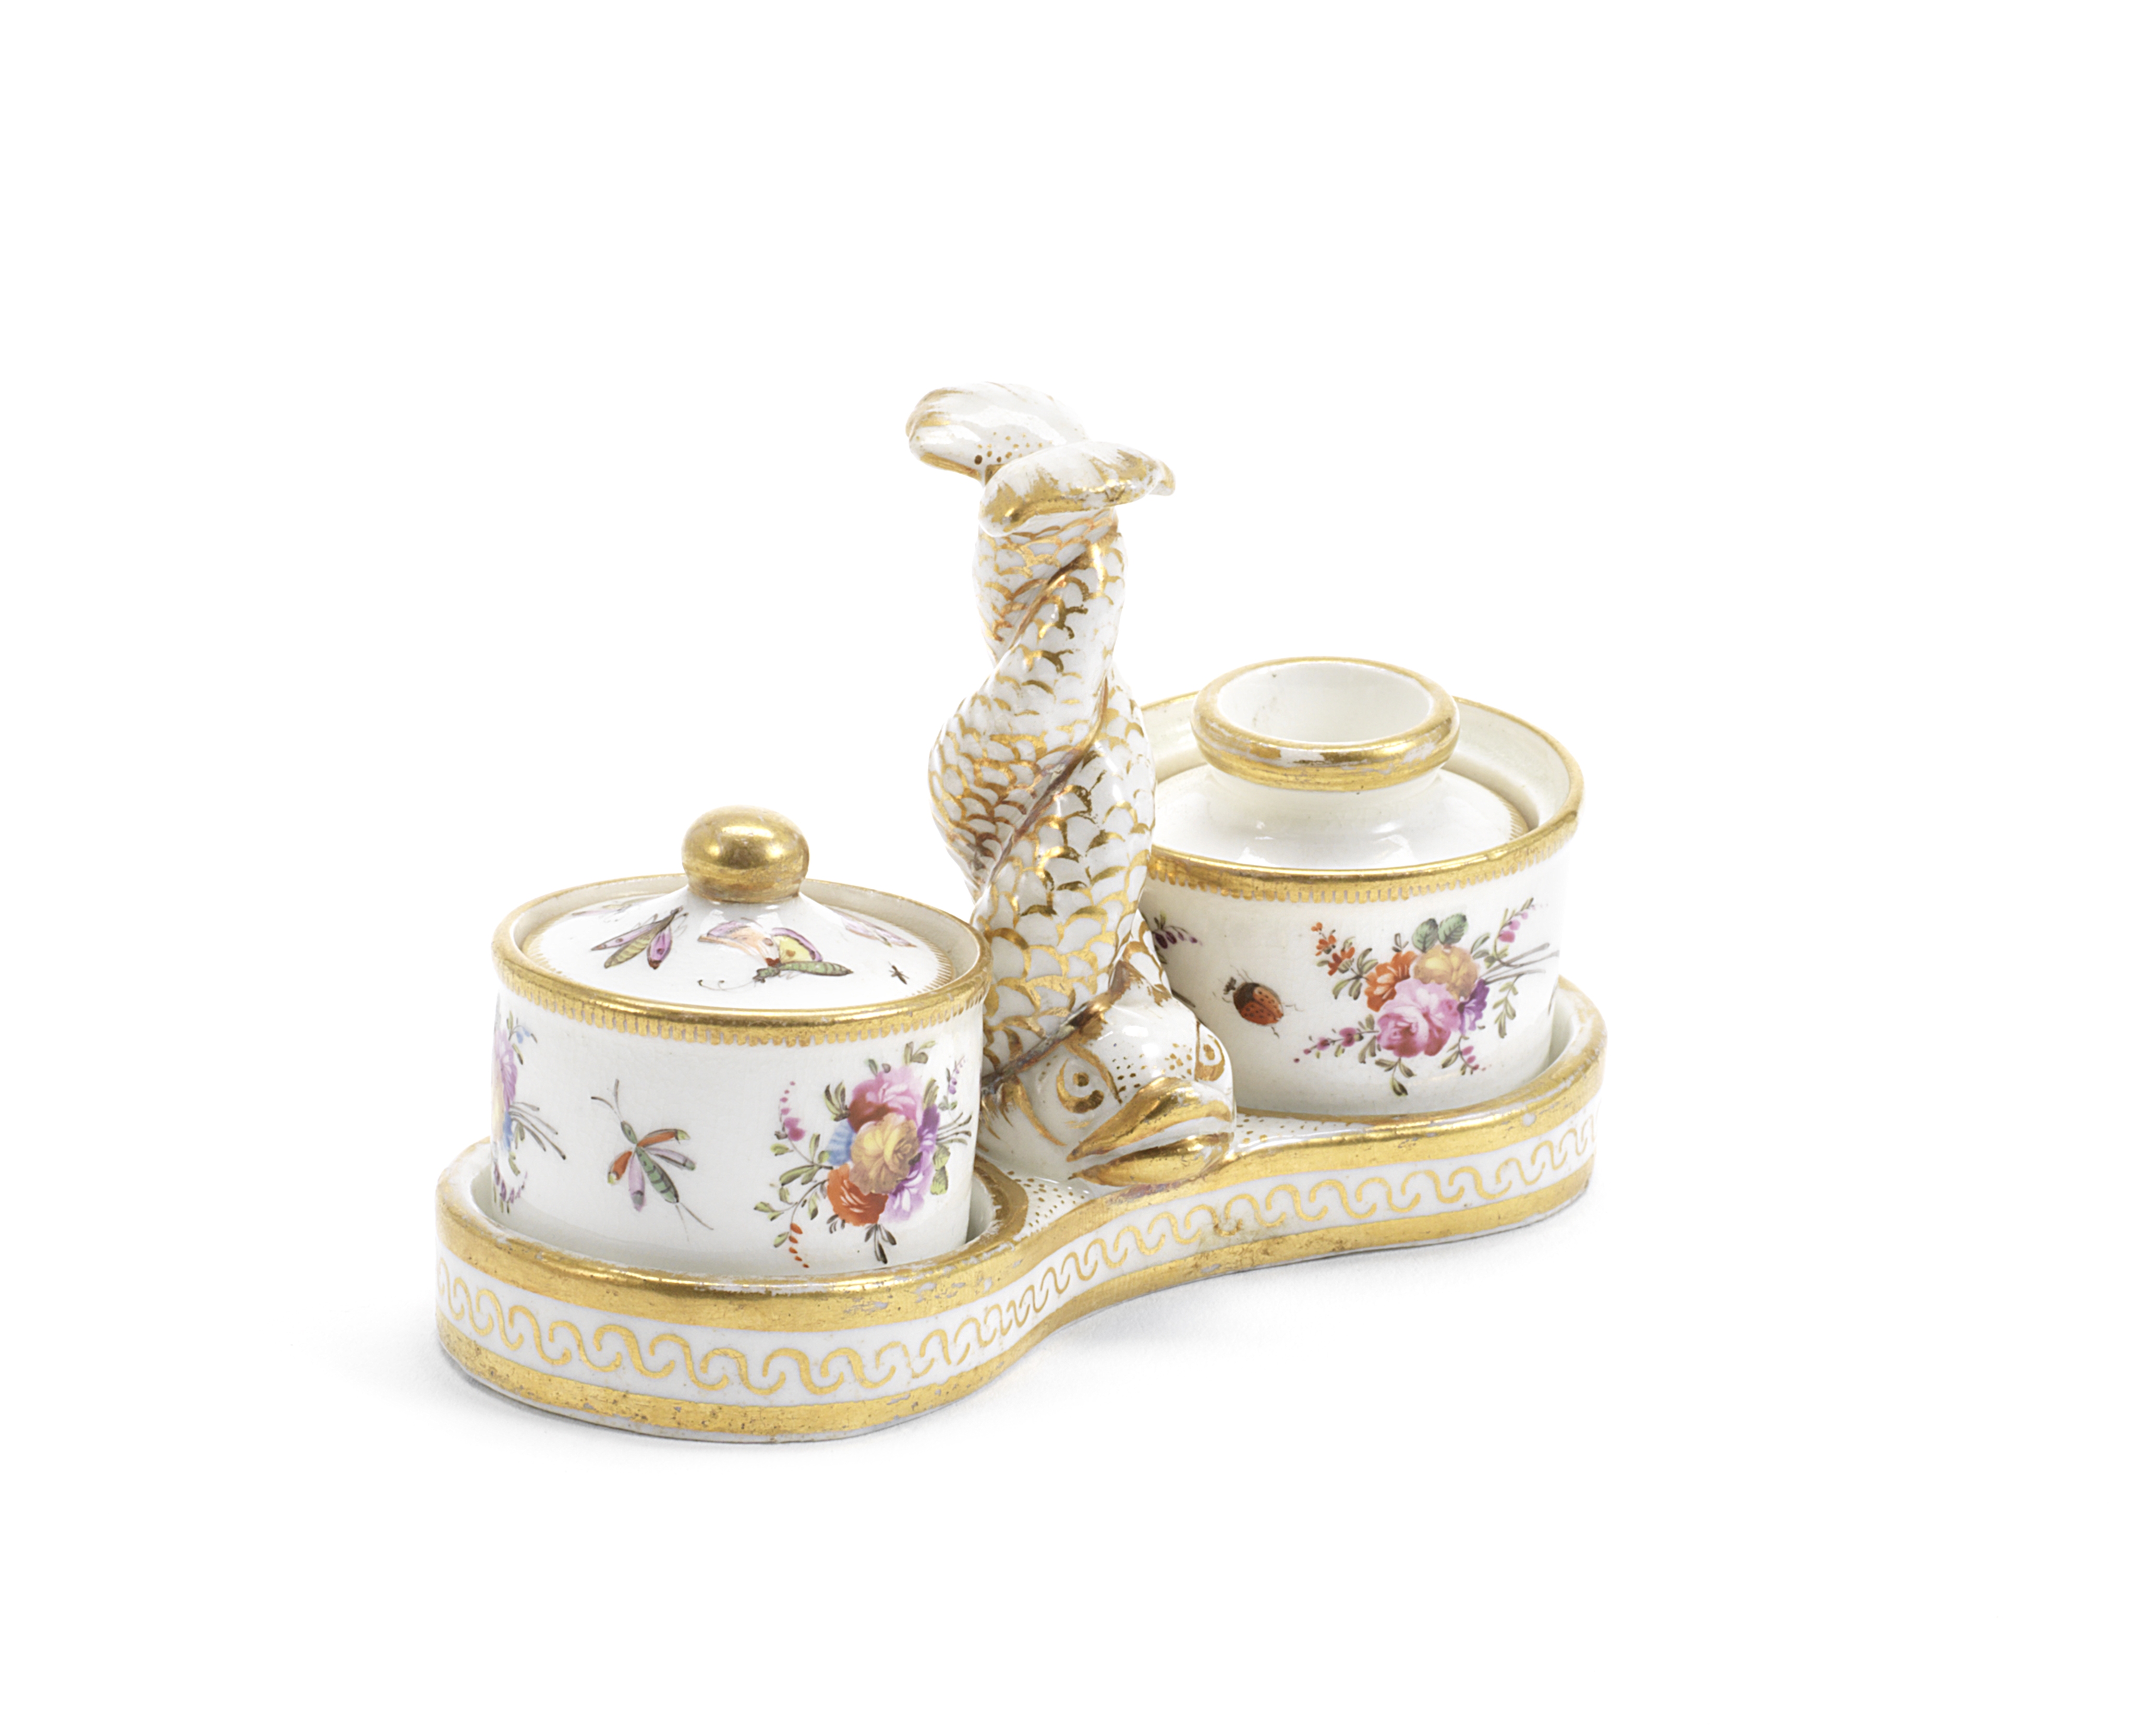 A Swansea inkstand, two inkwells and covers, circa 1815-17